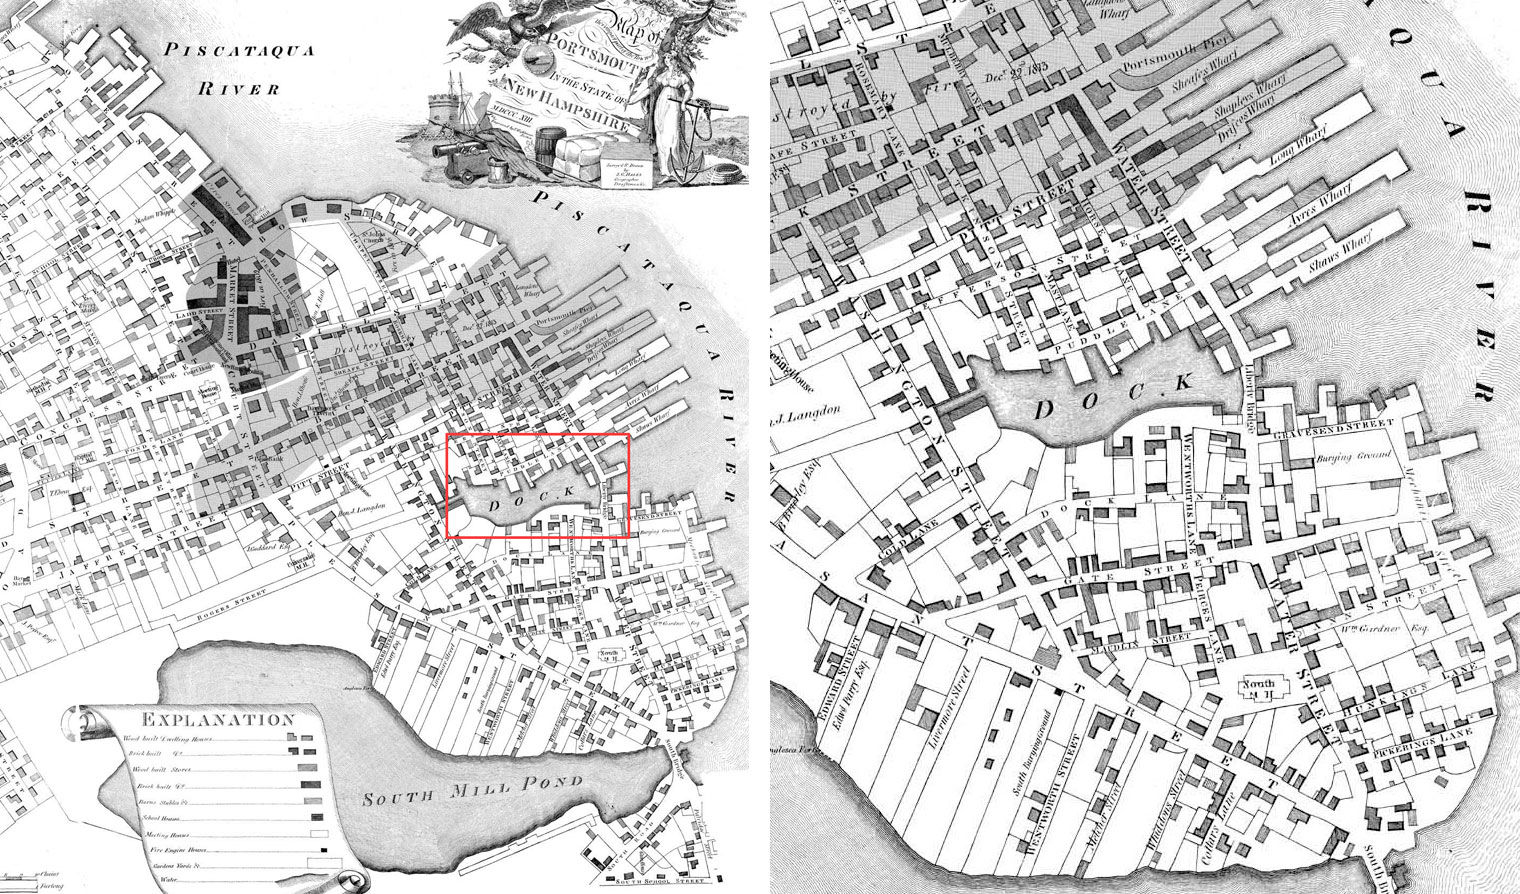 Black and white map of Portsmouth, New Hampshire, with a detail section of Puddle Dock